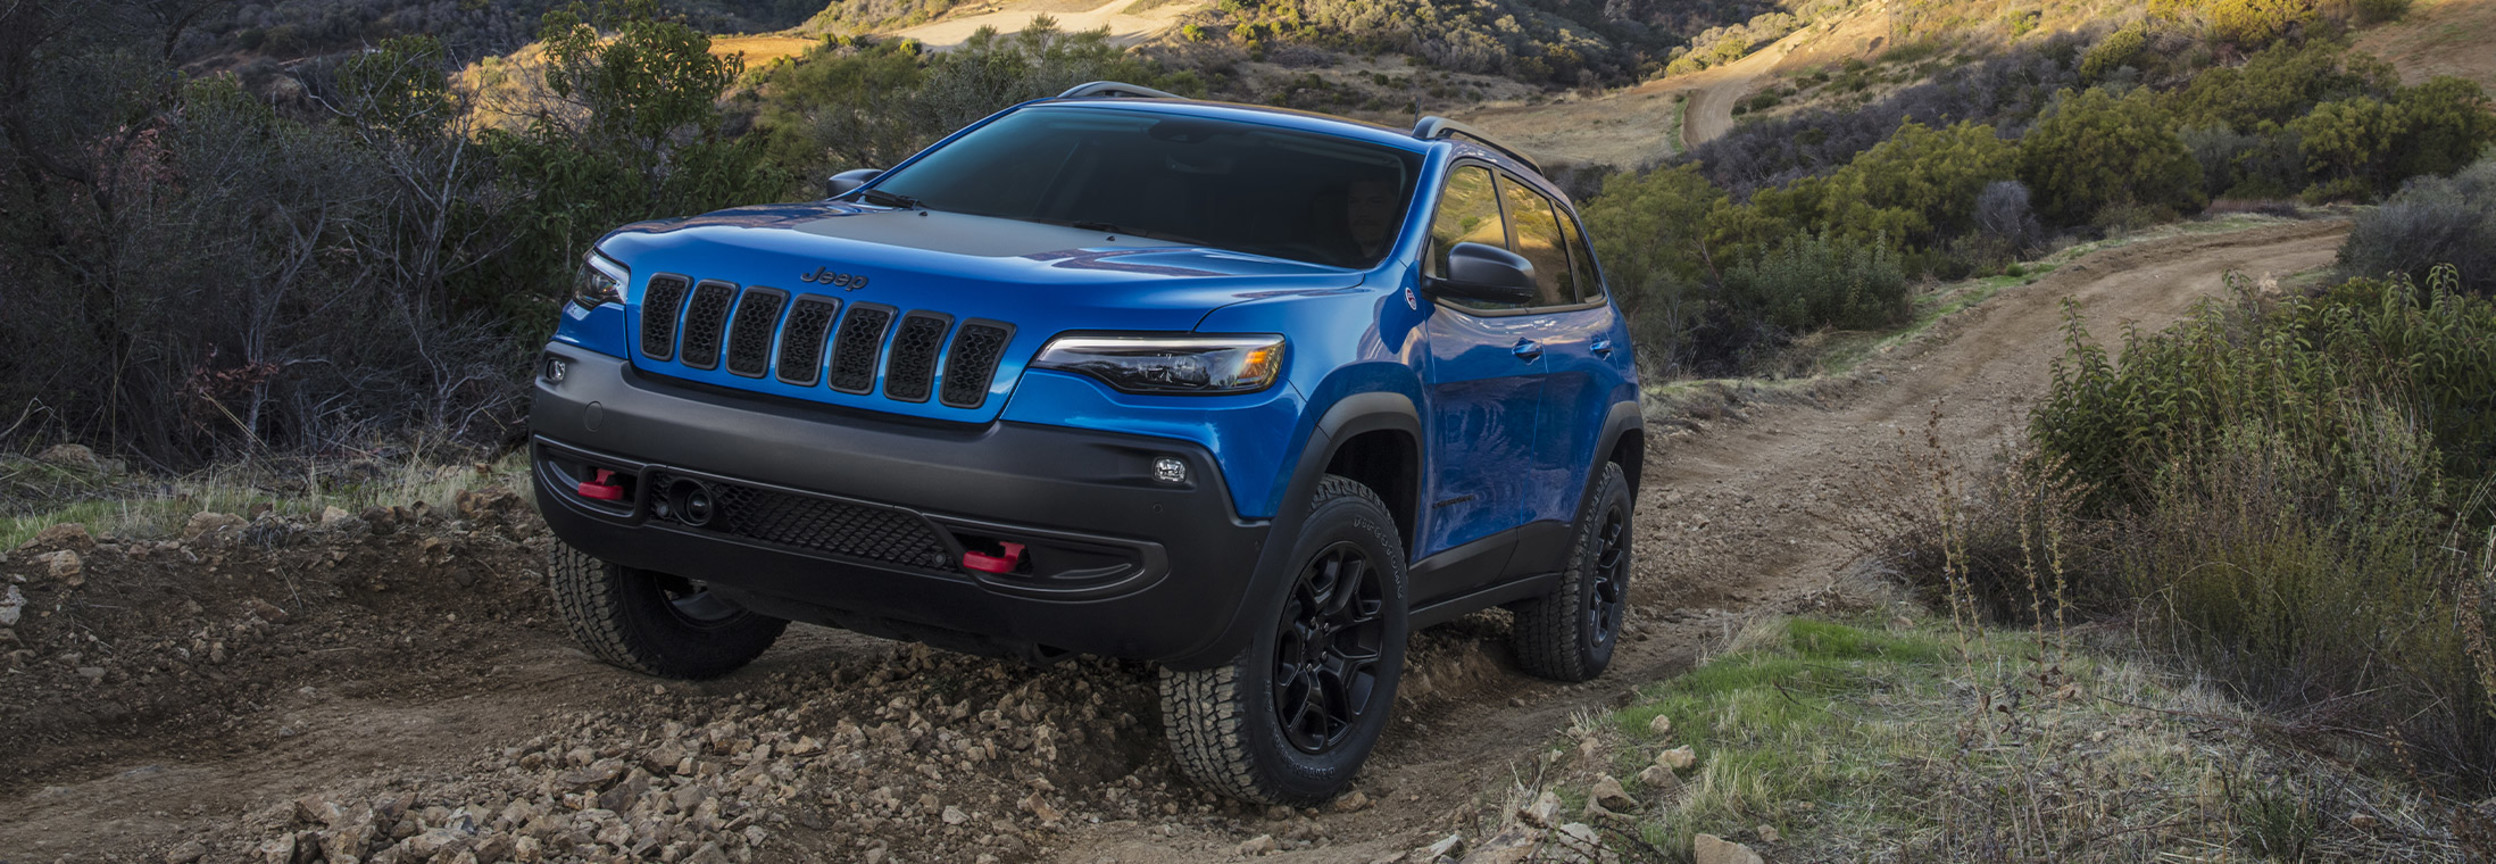 A 2022 Jeep Cherokee SUV  driving on a rocky off-road trail in an arid landscape. 